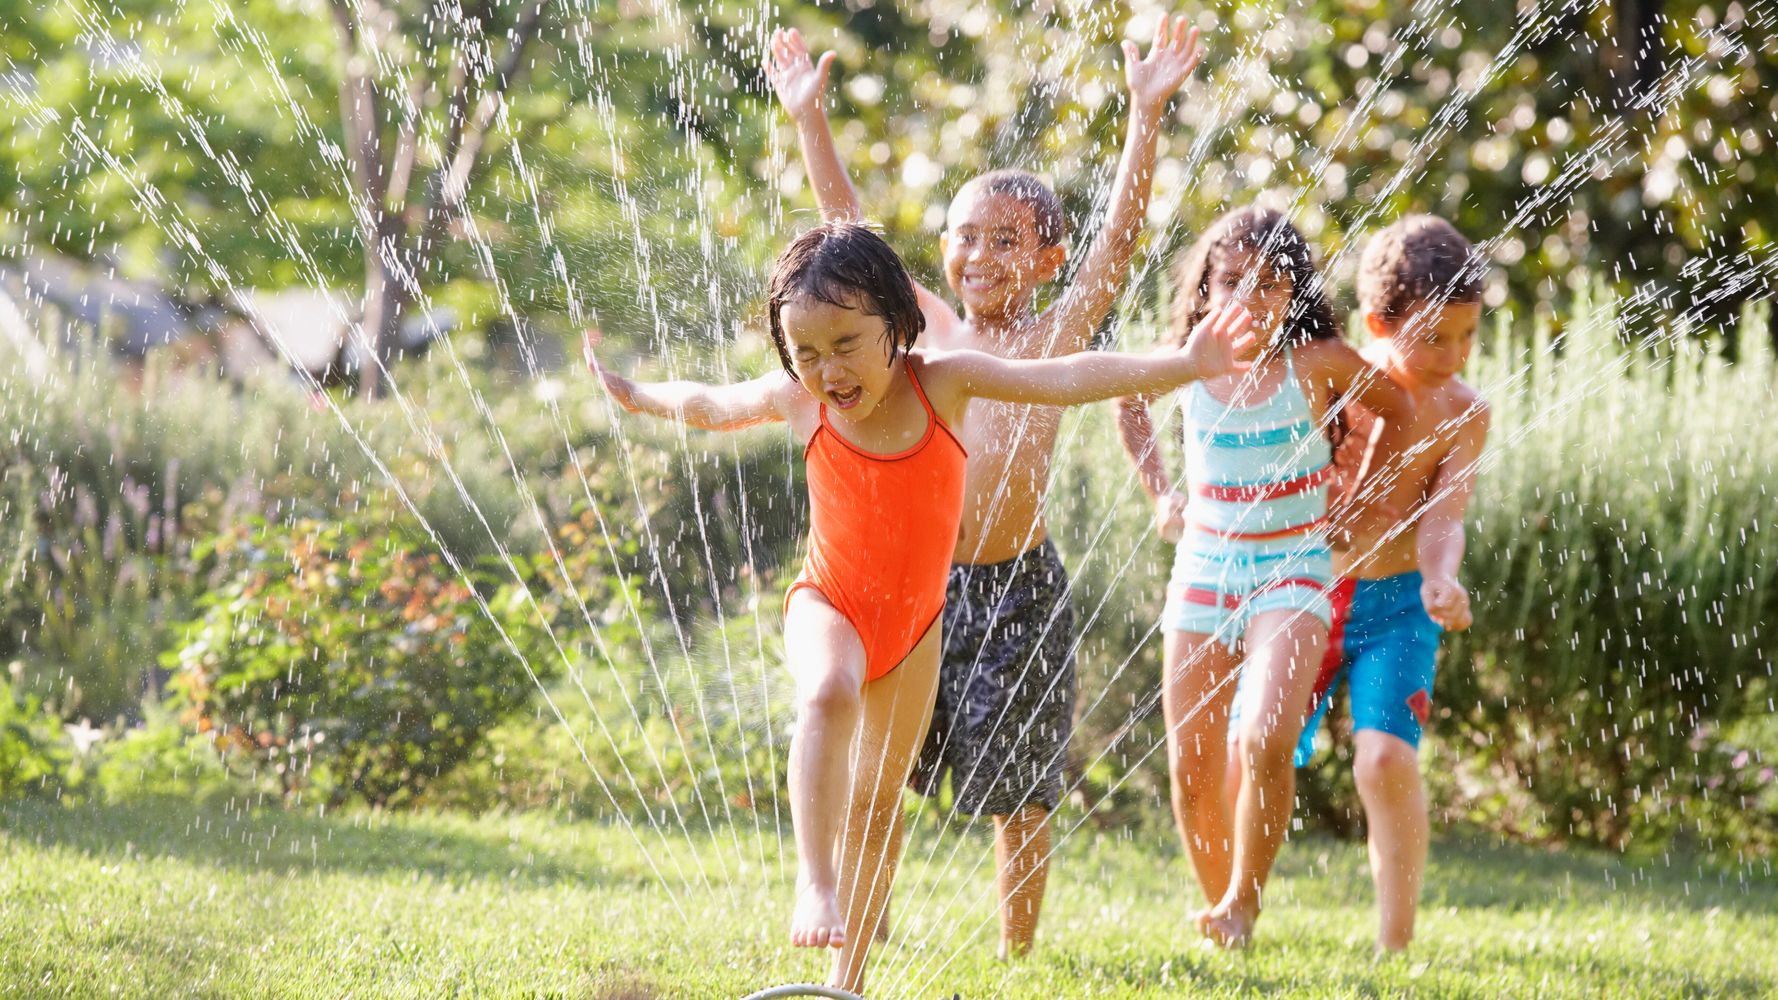 We Found Sprinkler Accessories That Will Make Your Kid